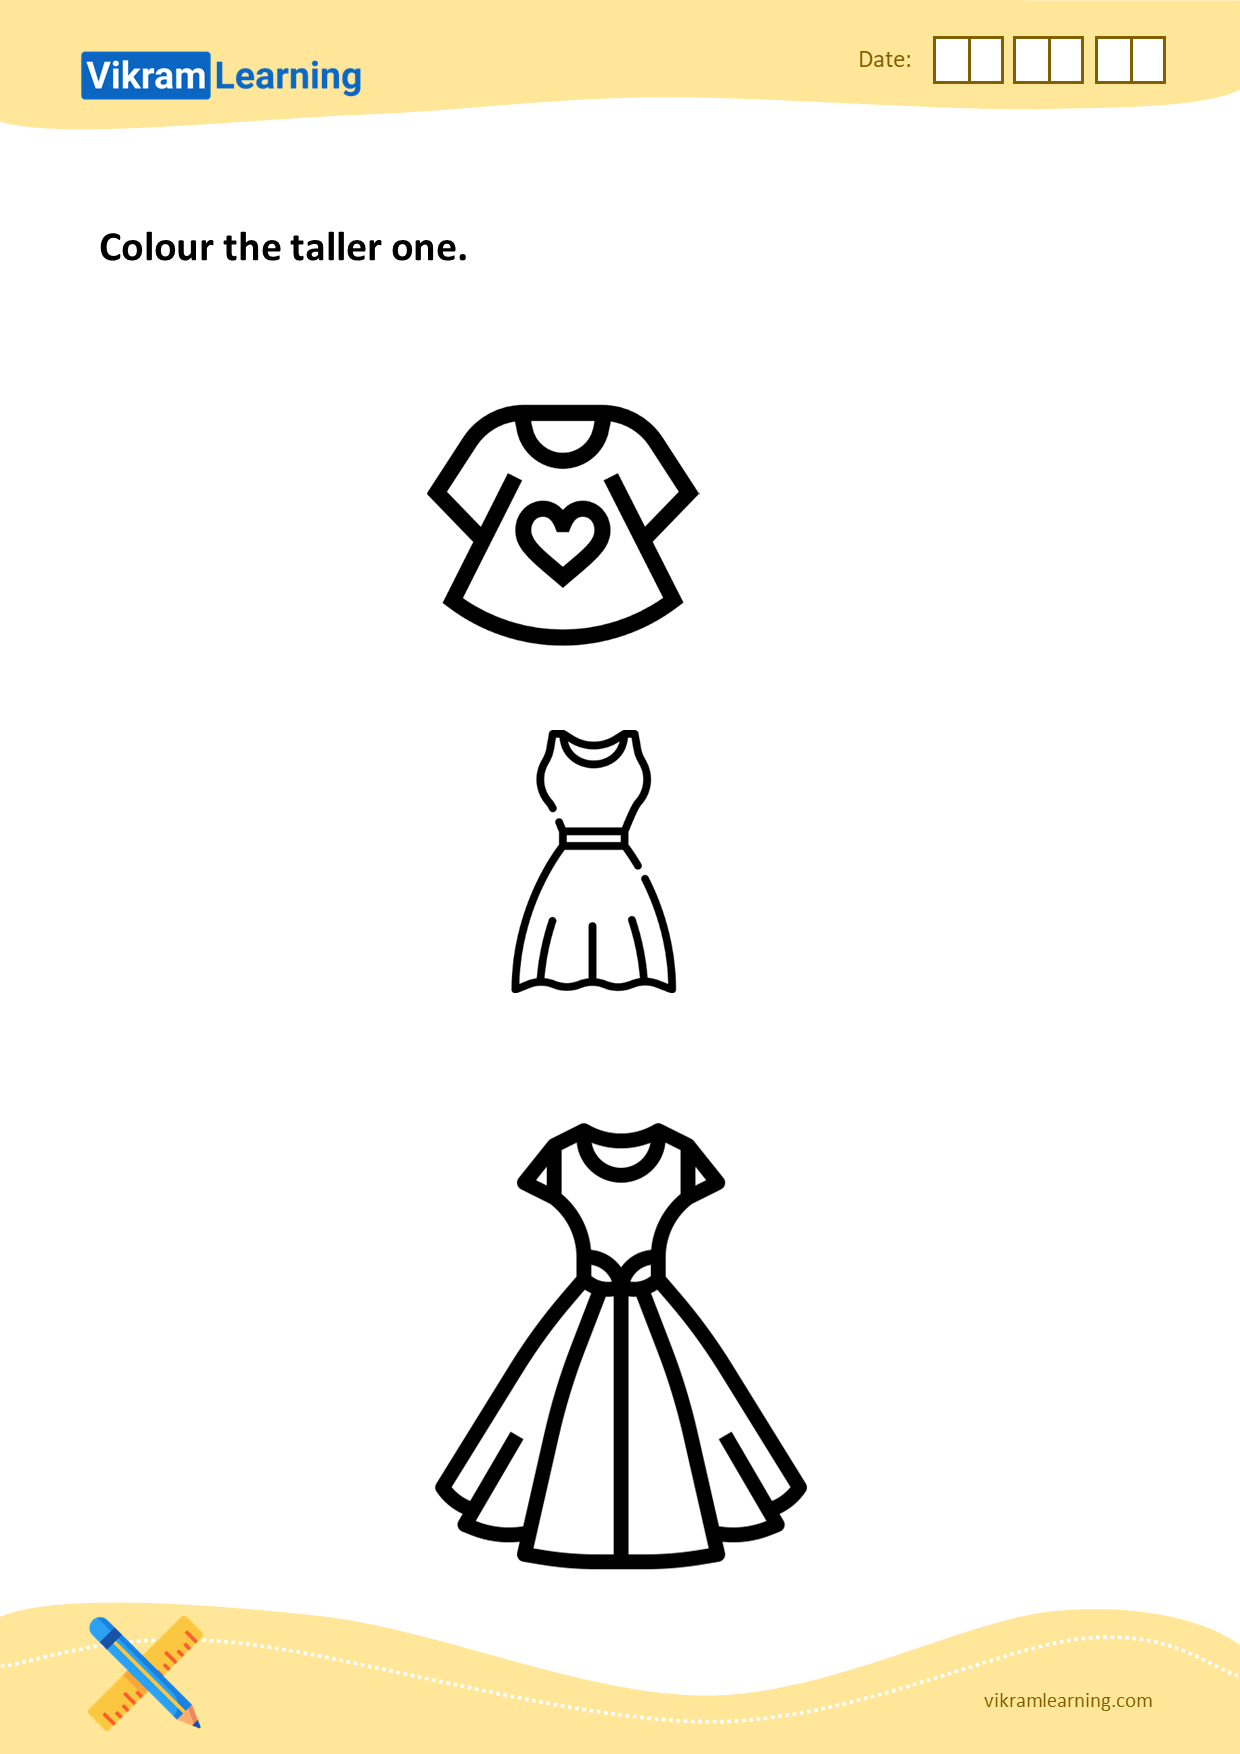 Download colour the taller one - 2 worksheets